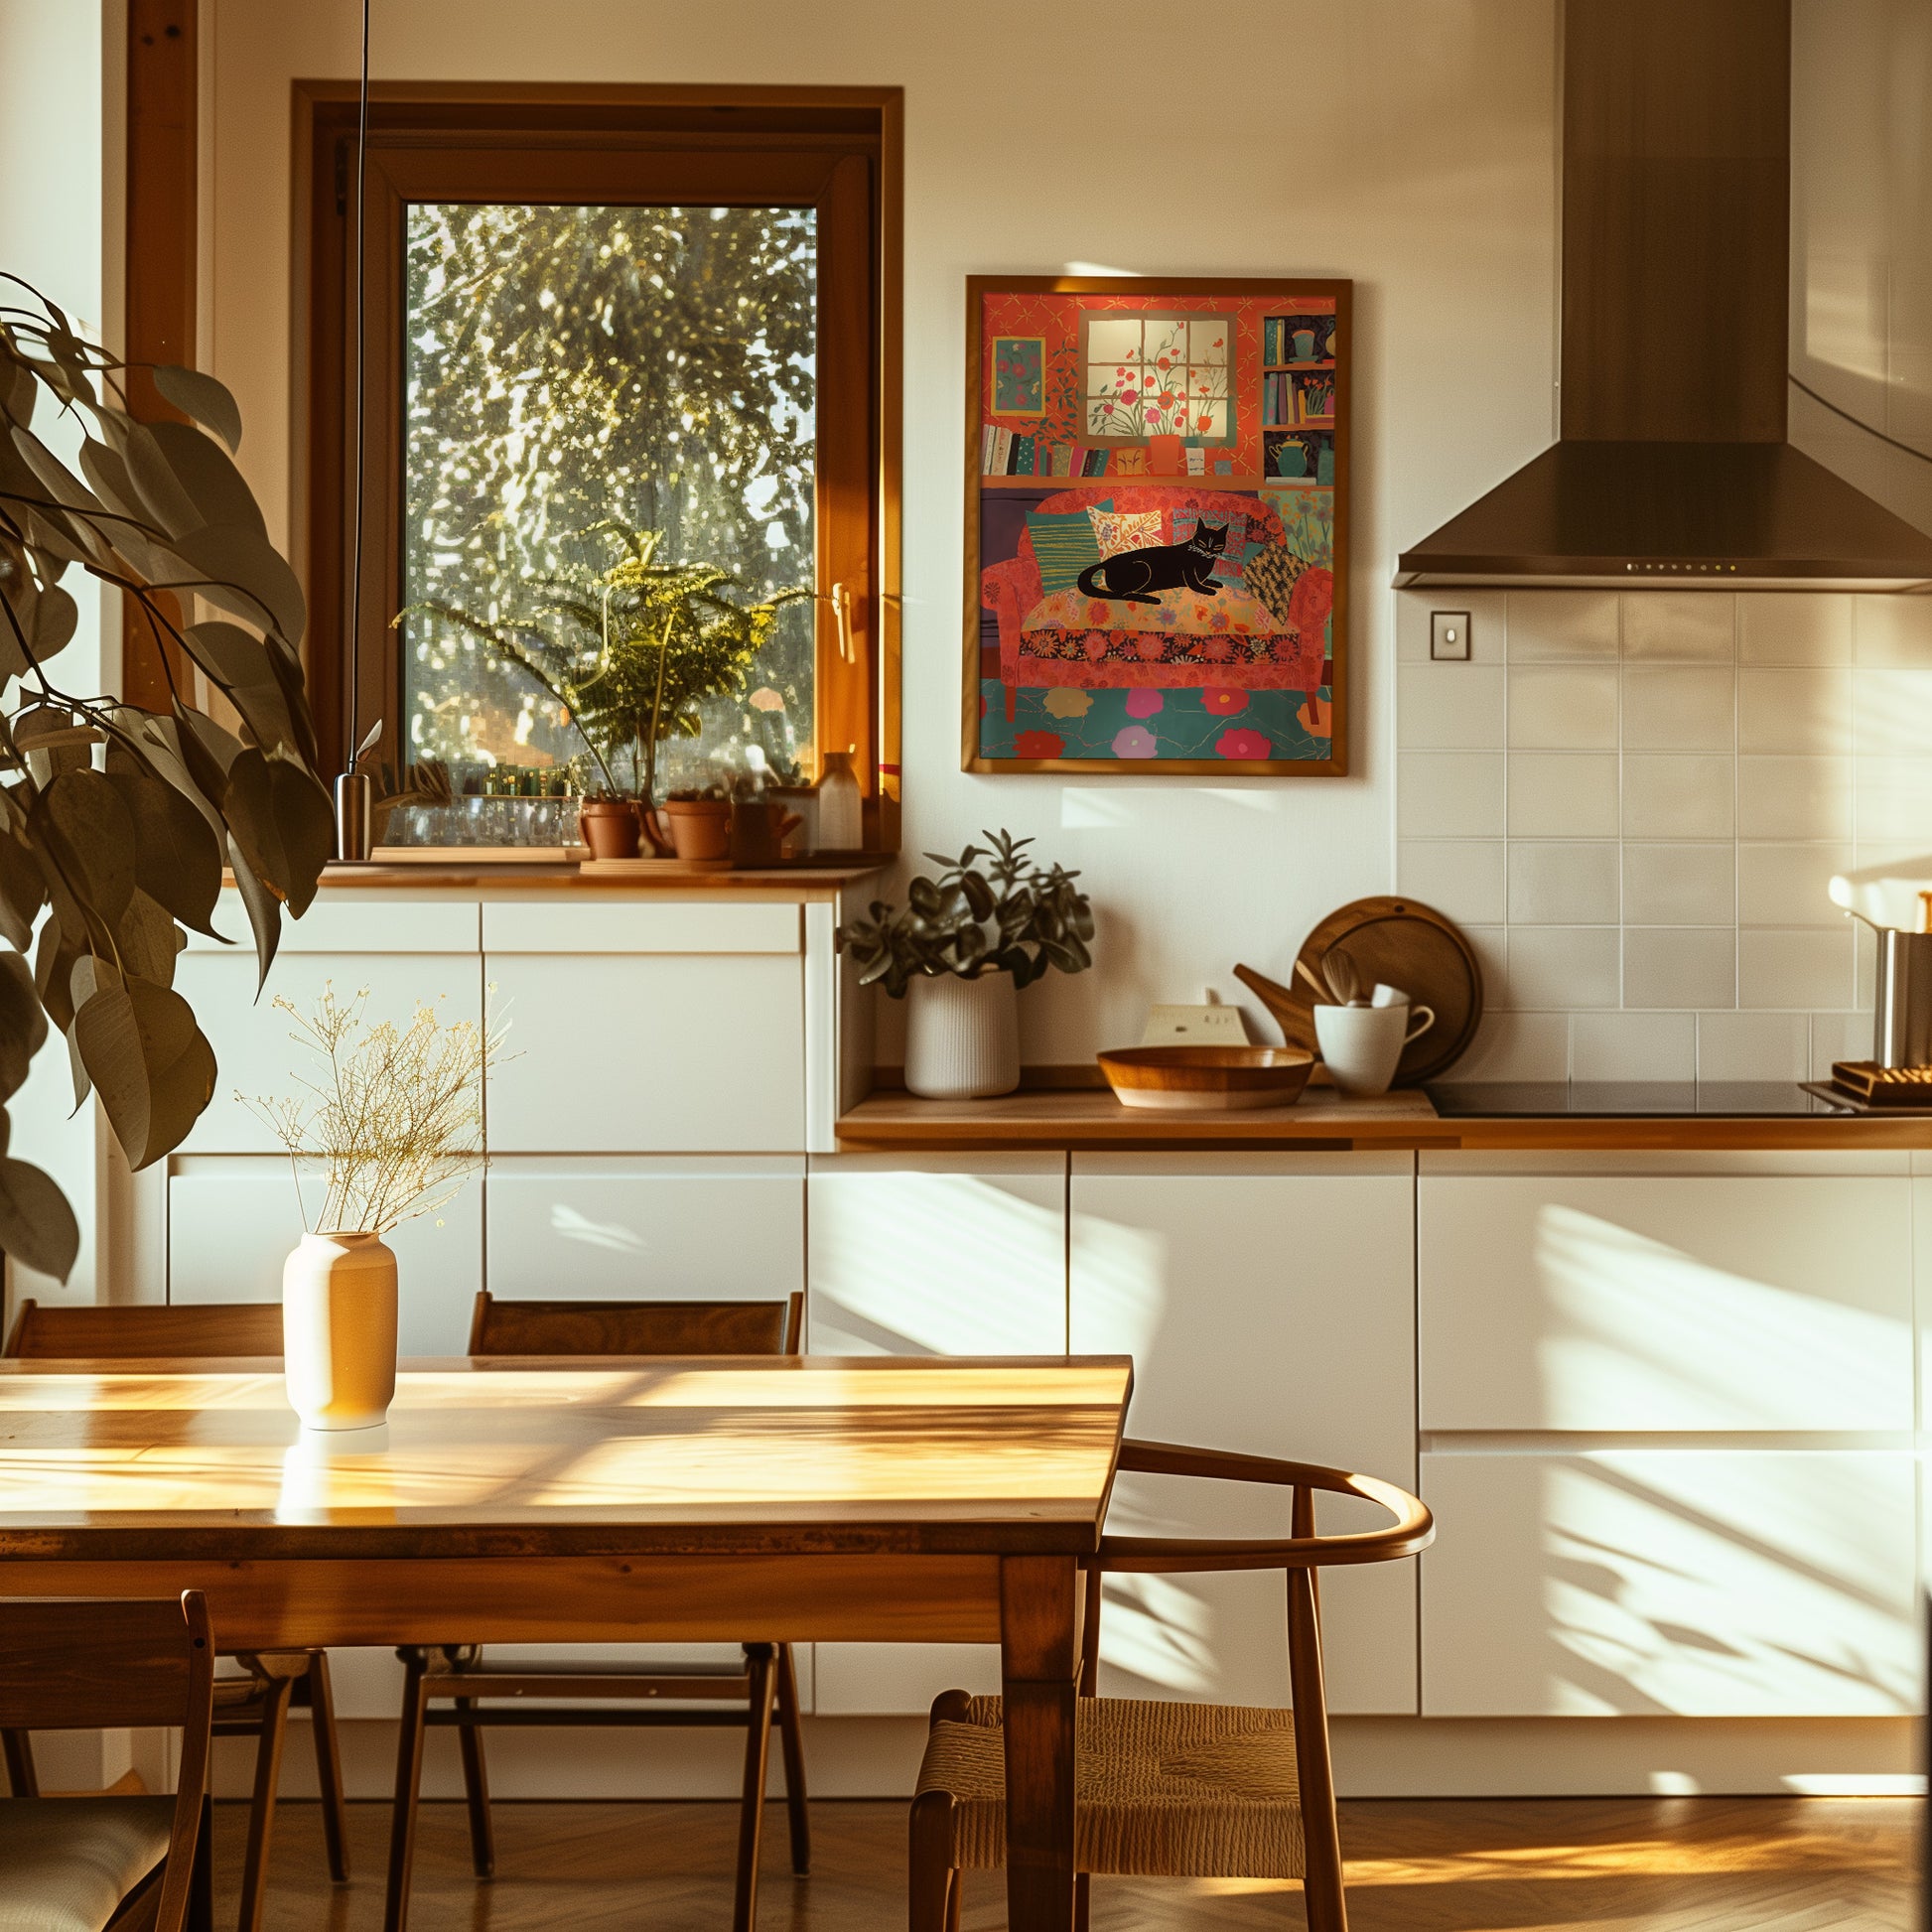 Cozy sunlit kitchen with plants on window sill and wooden table.